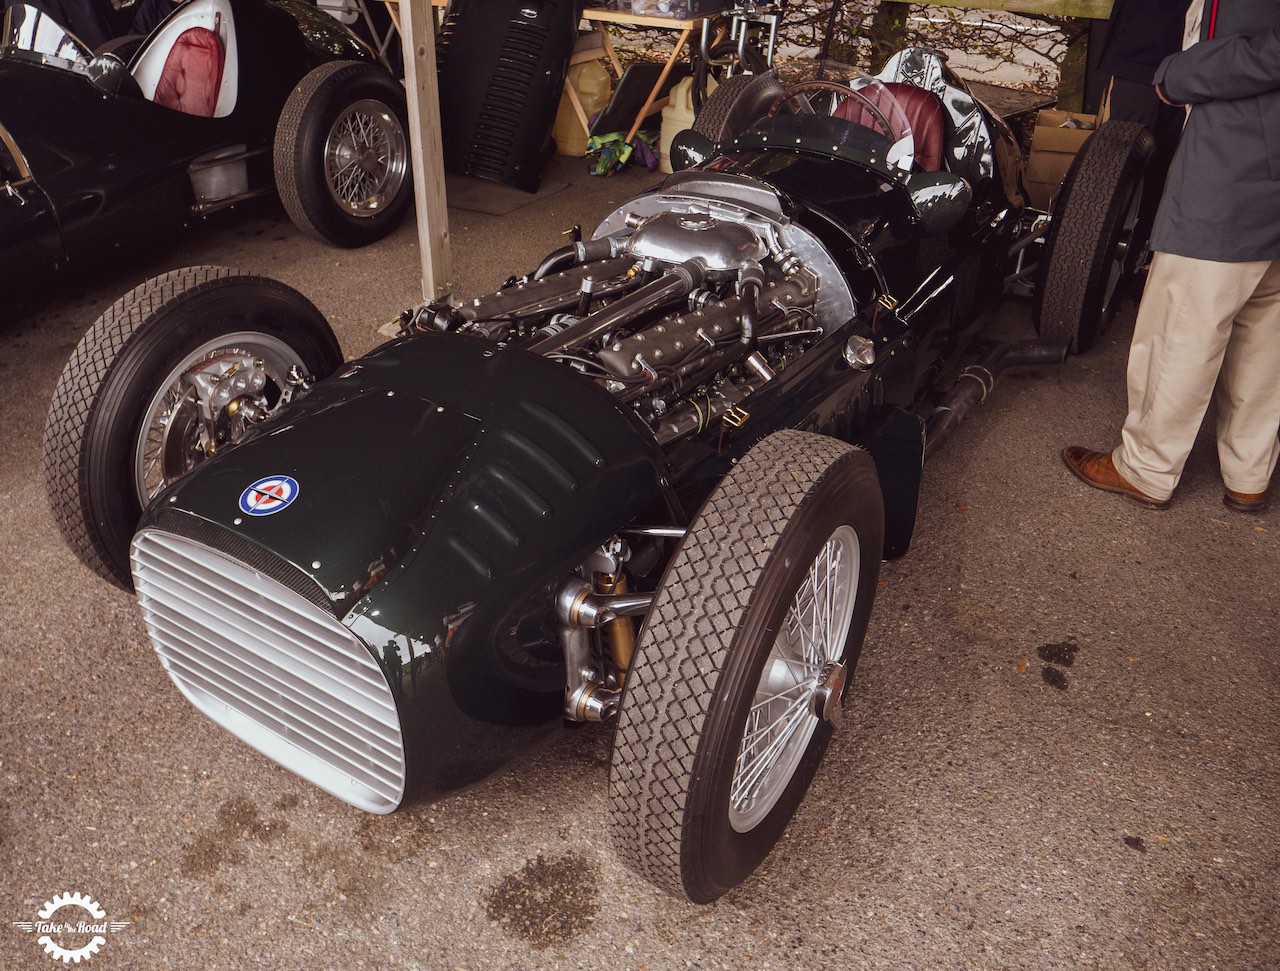 New BRM P15 V16 acquired by collector Richard Mille